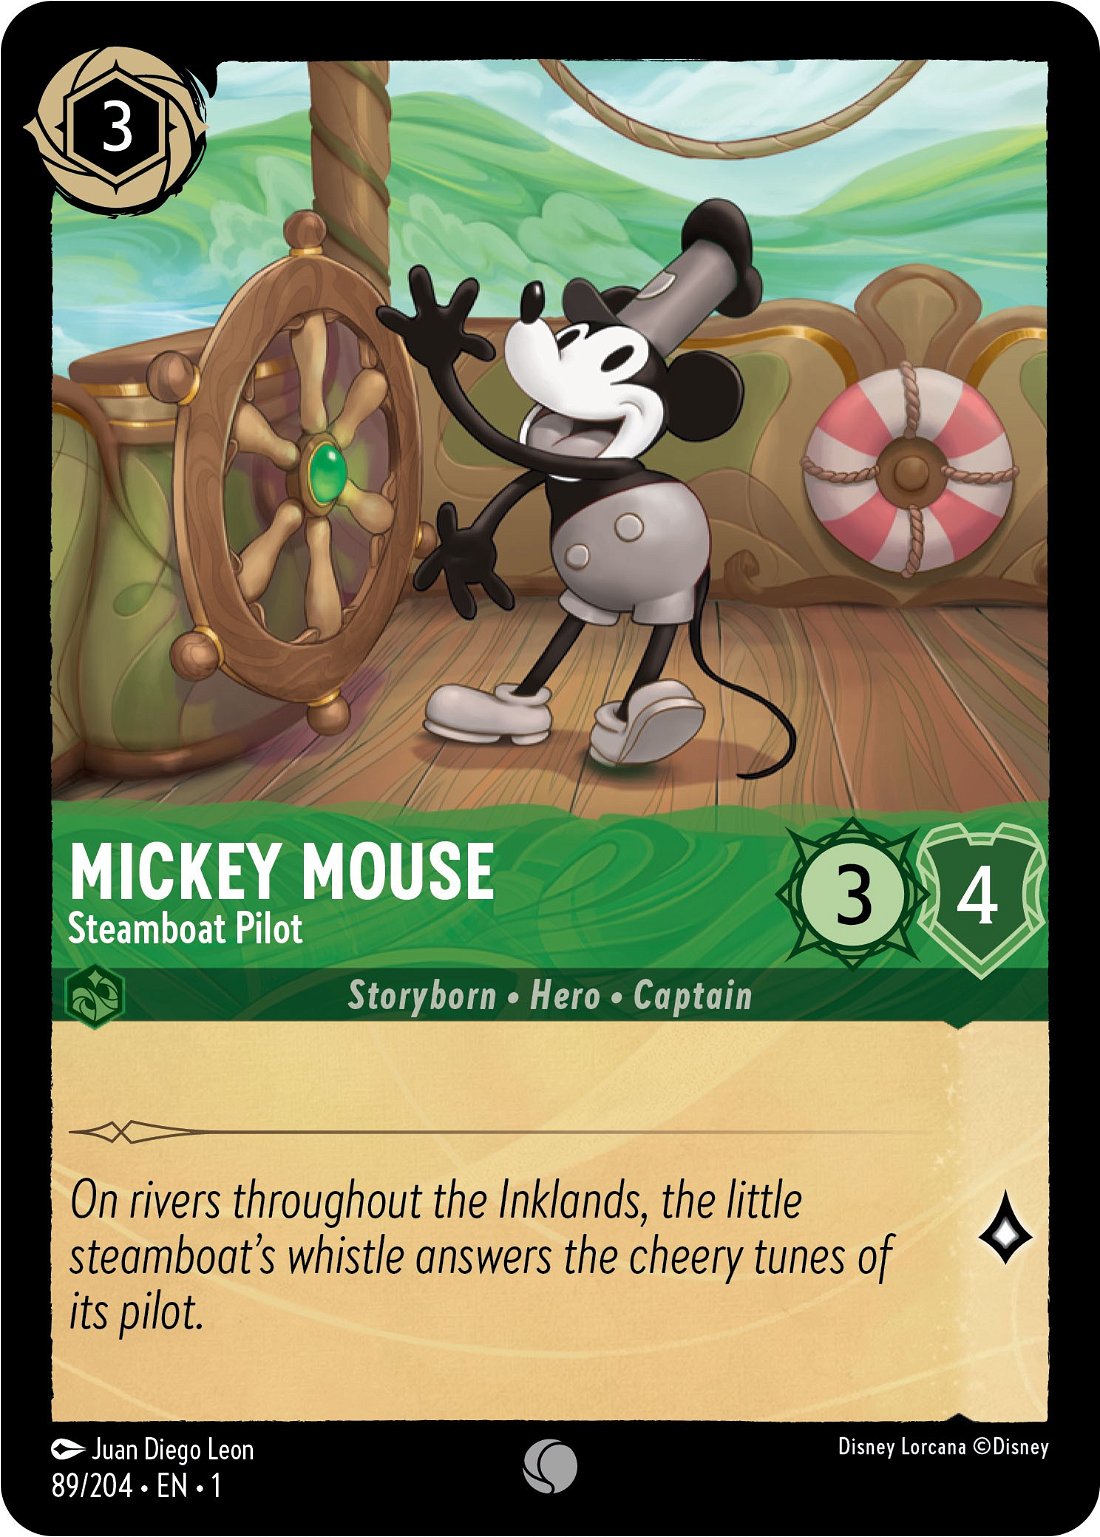 Mickey Mouse - Steamboat Pilot Crop image Wallpaper